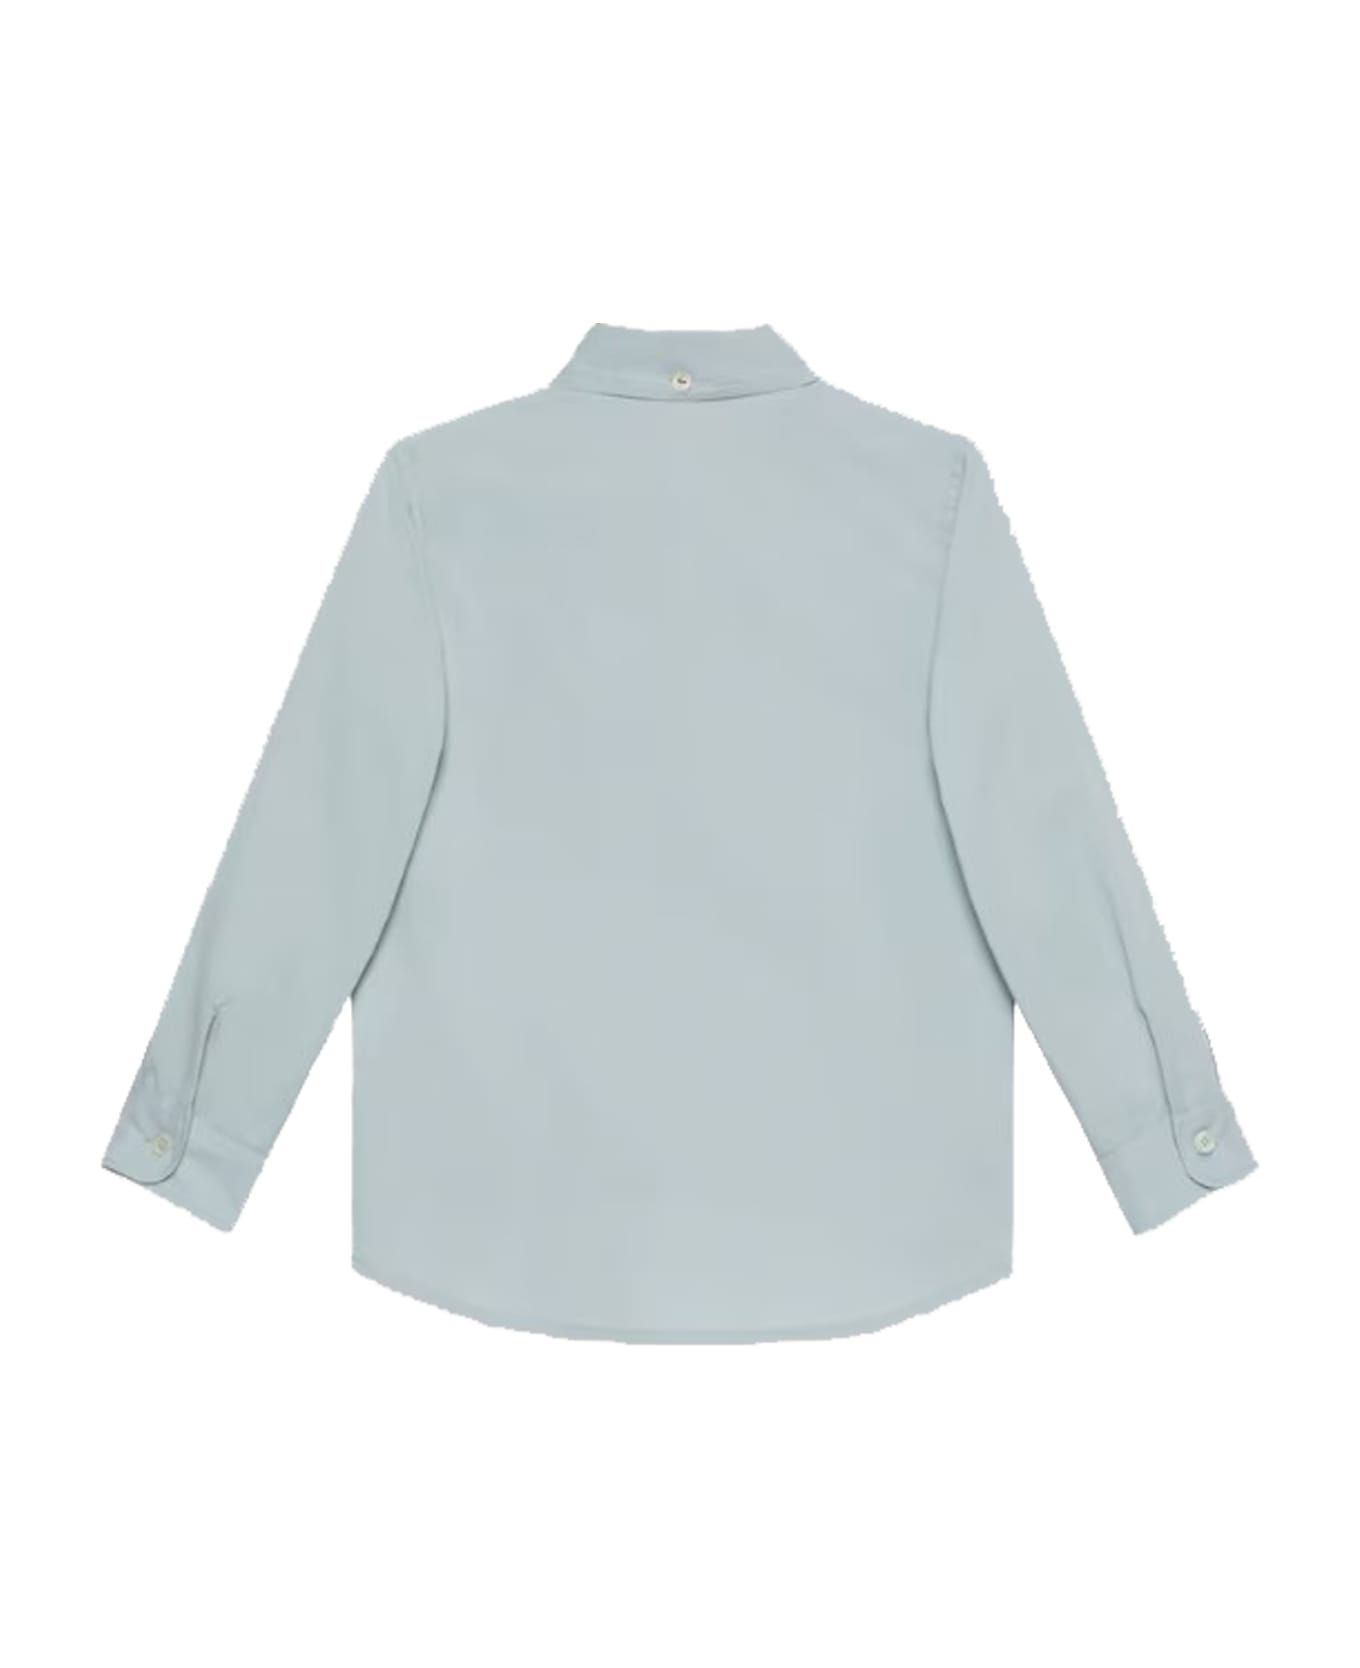 Gucci Cotton Shirt With Embroidery - Light blue